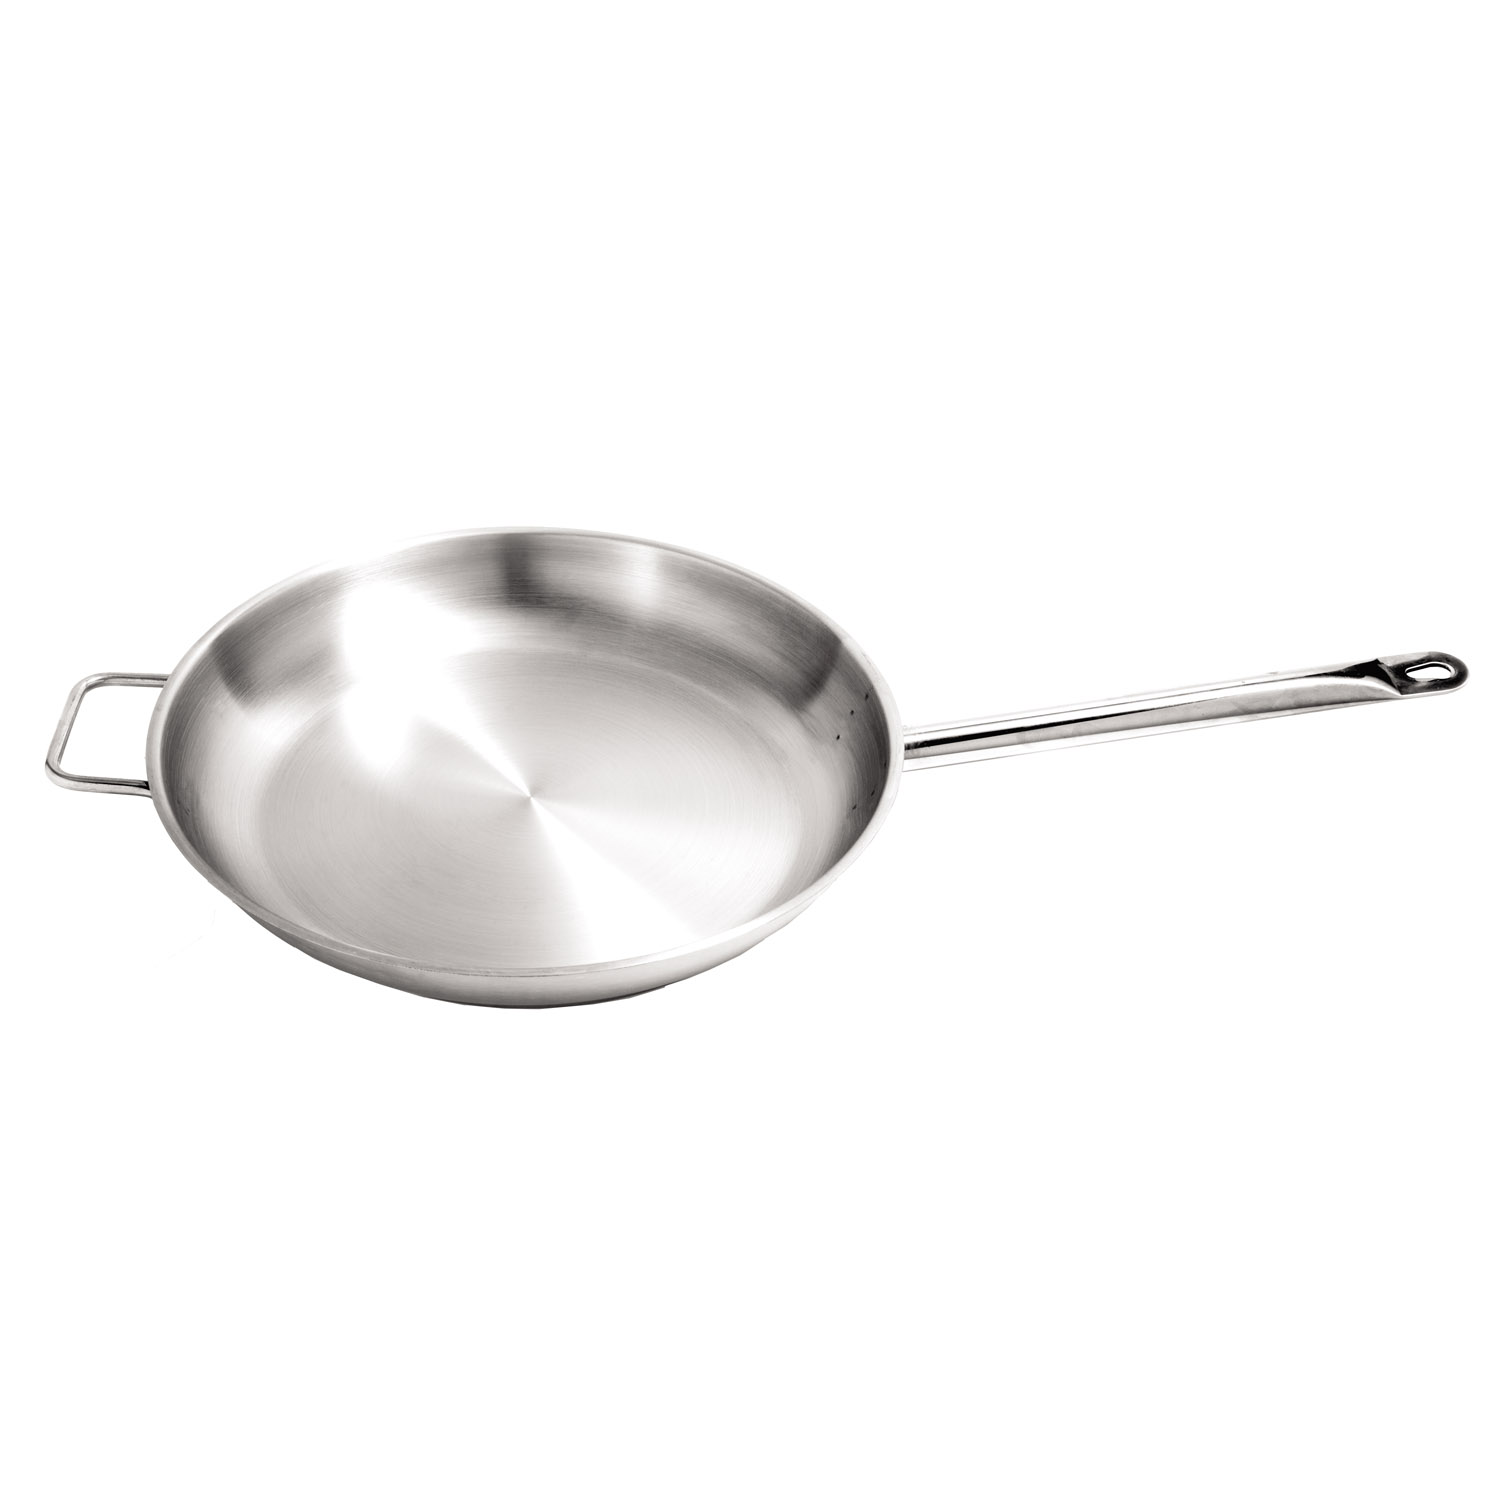 CAC China S1FP-12H Stainless Steel Fry Pan with Helper Handle 12"